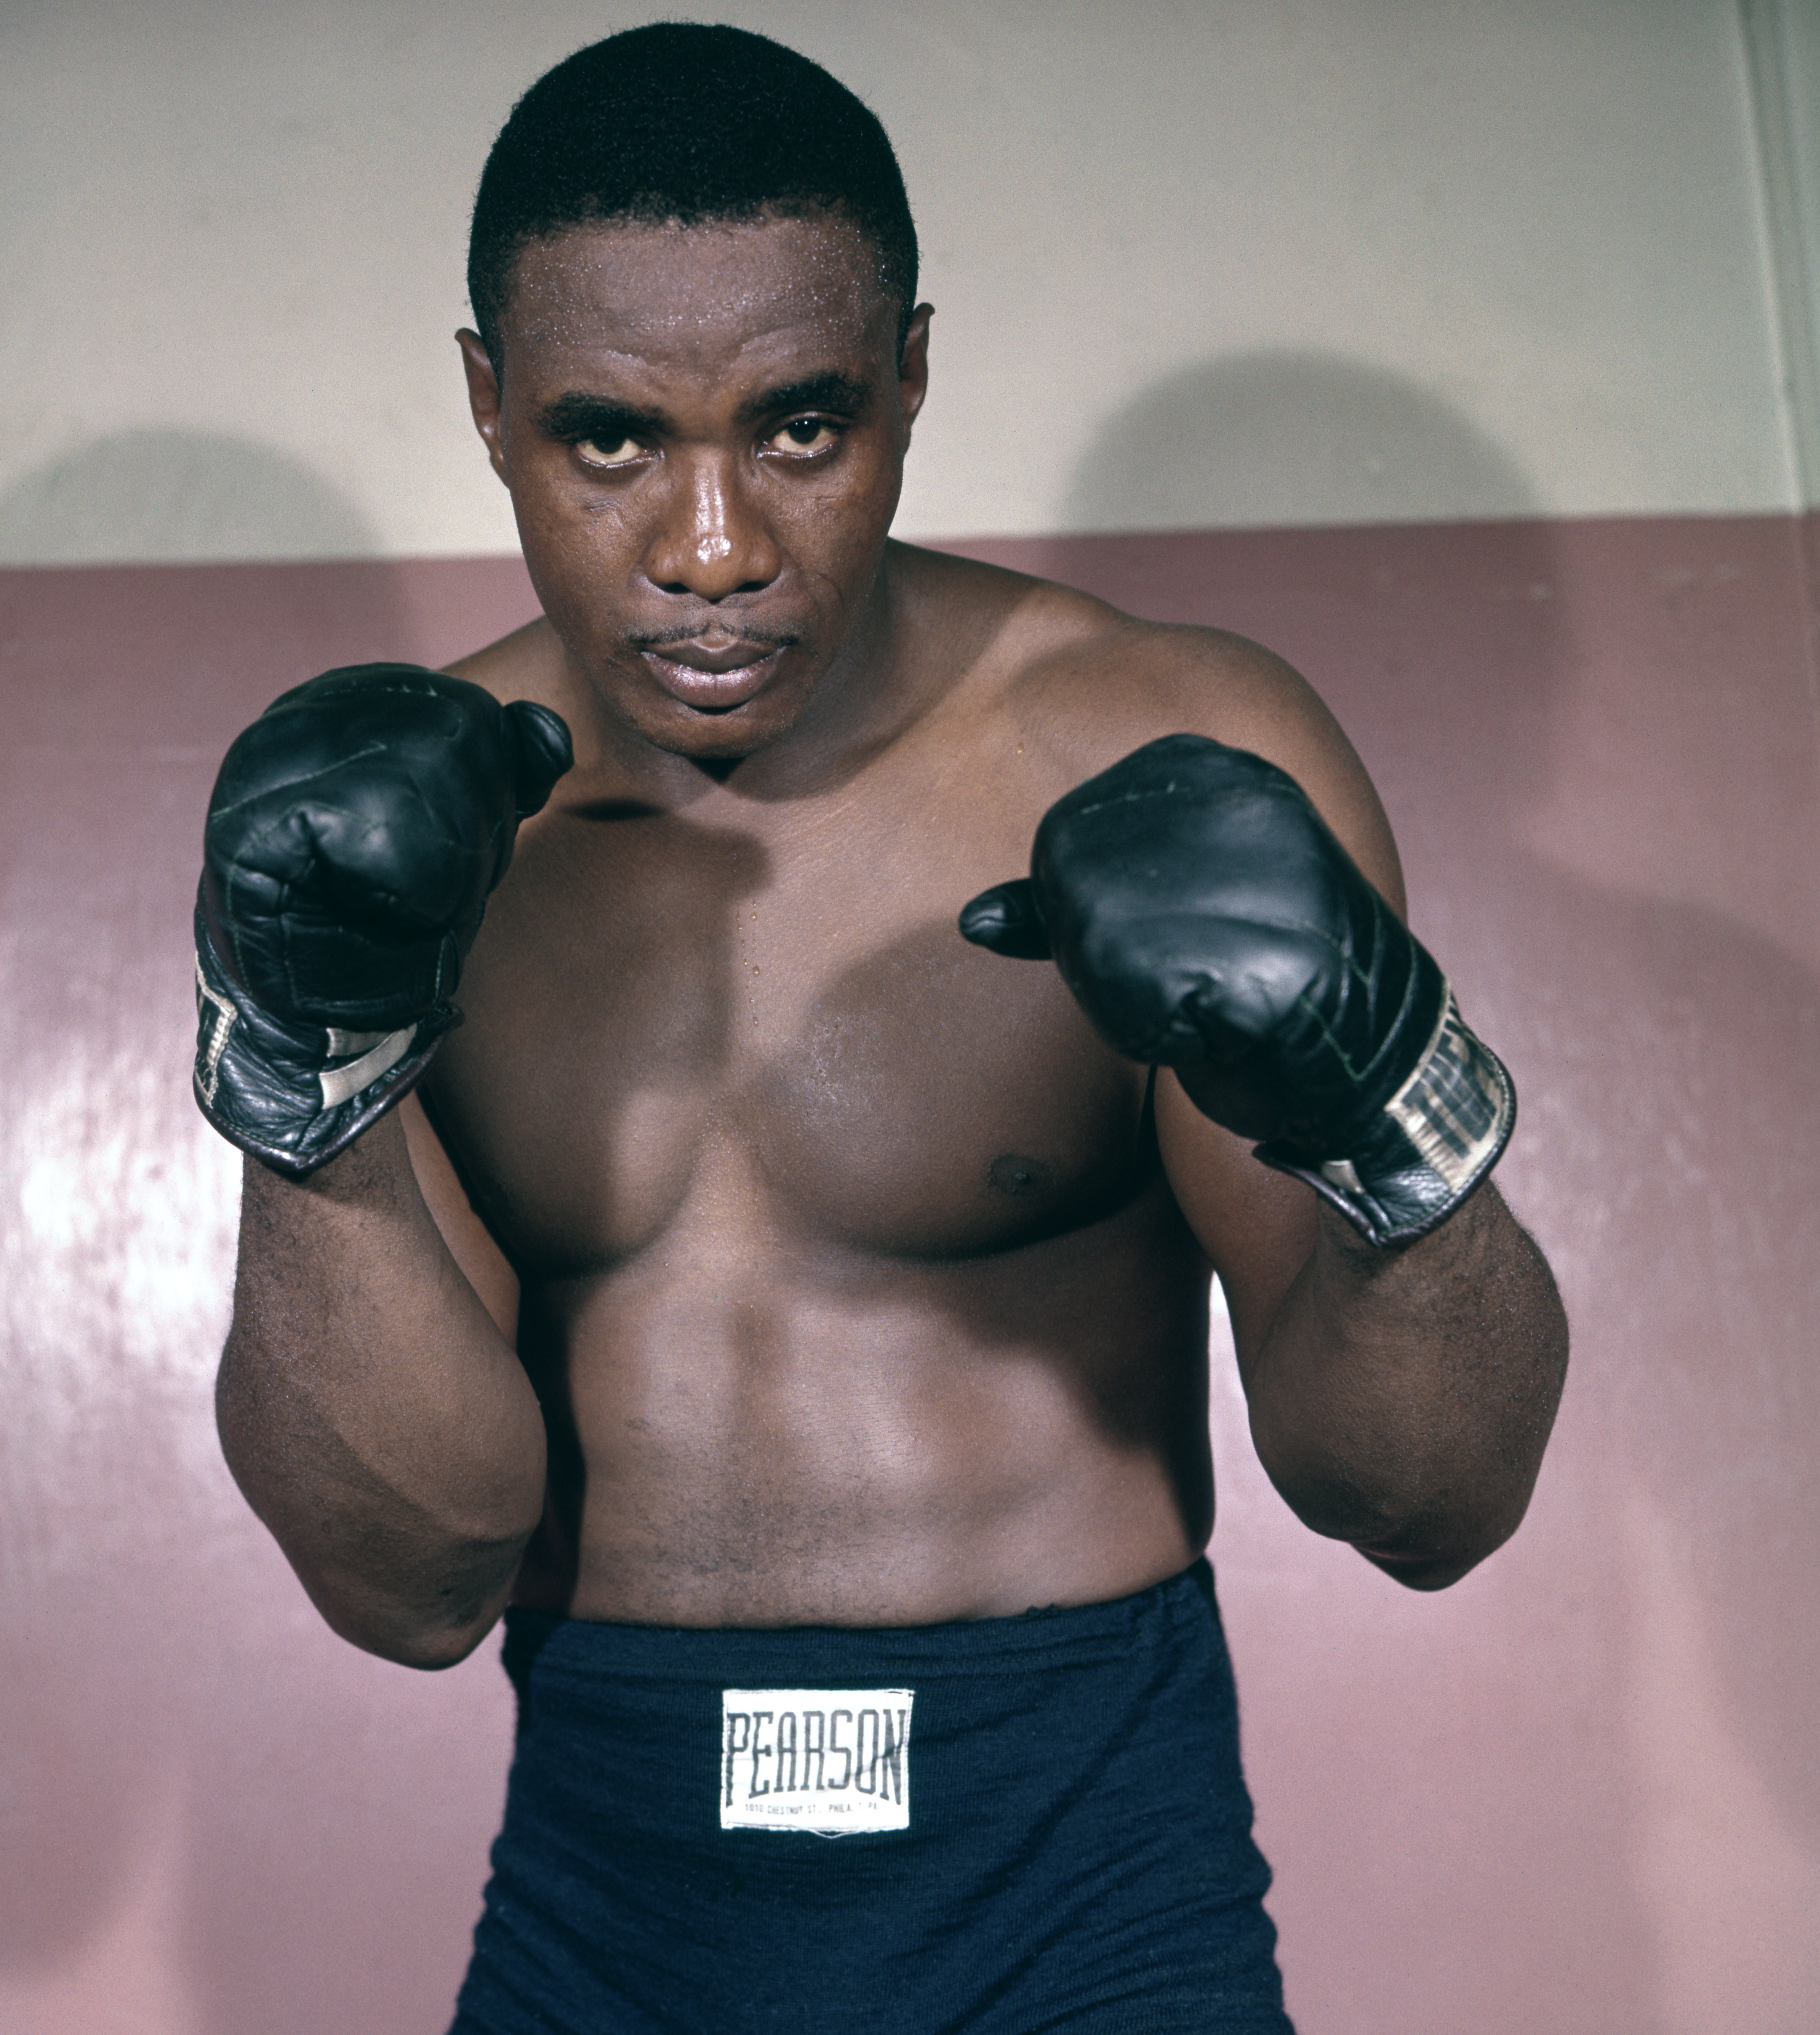 Sonny Liston was one of history’s most fearsome heavyweights